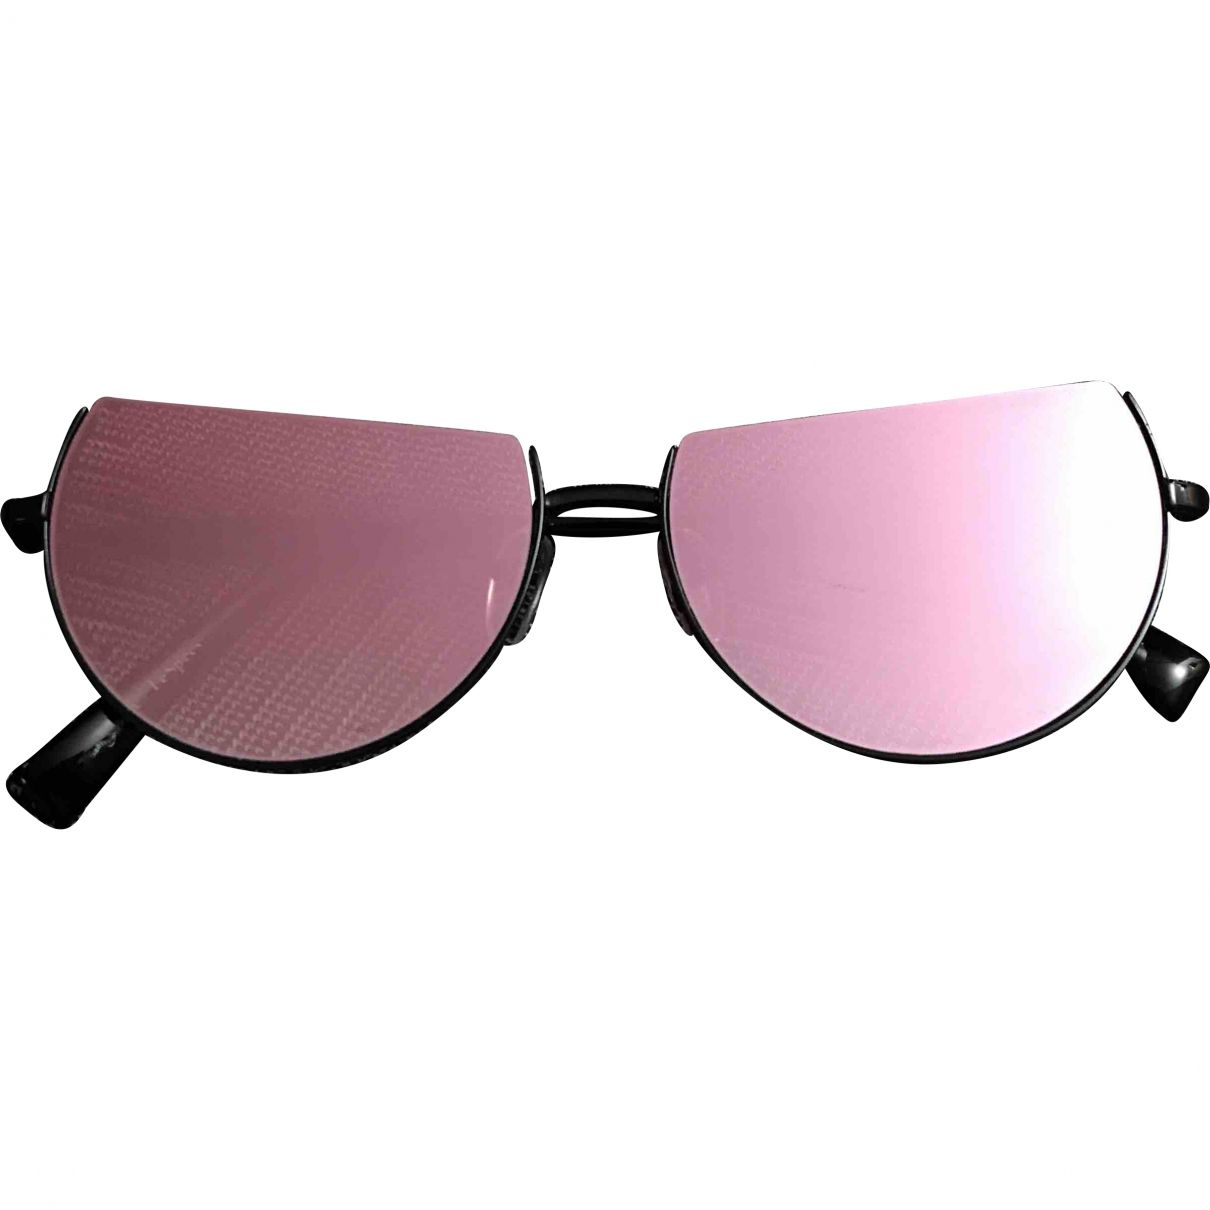 Sunglasses Le Specs Pink in Metal - 5351795